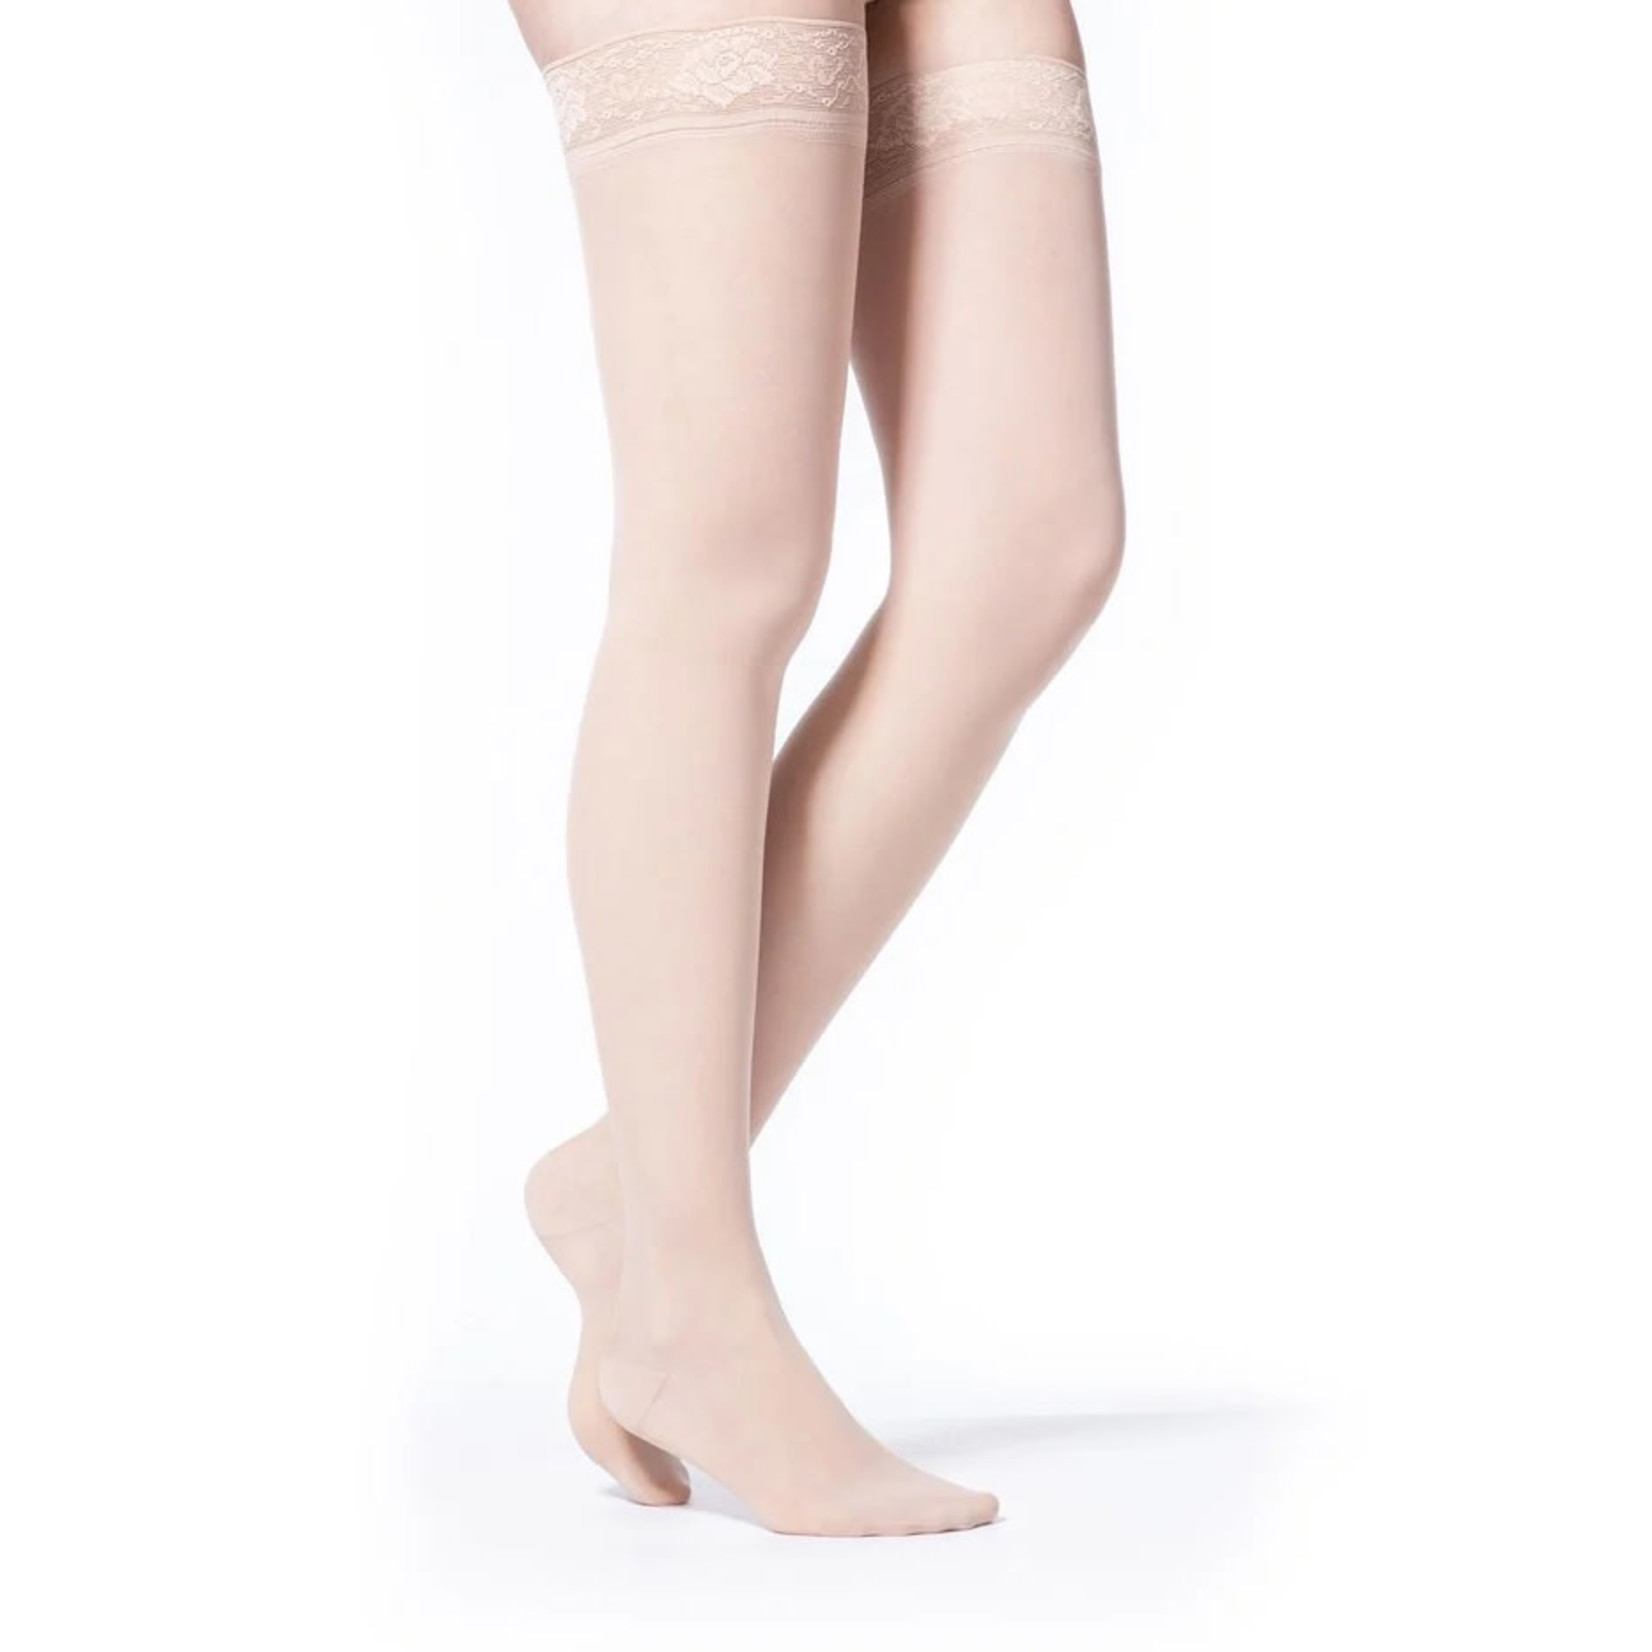 Sigvaris Women Sheer Thigh High with Grip-Top Compression Stockings